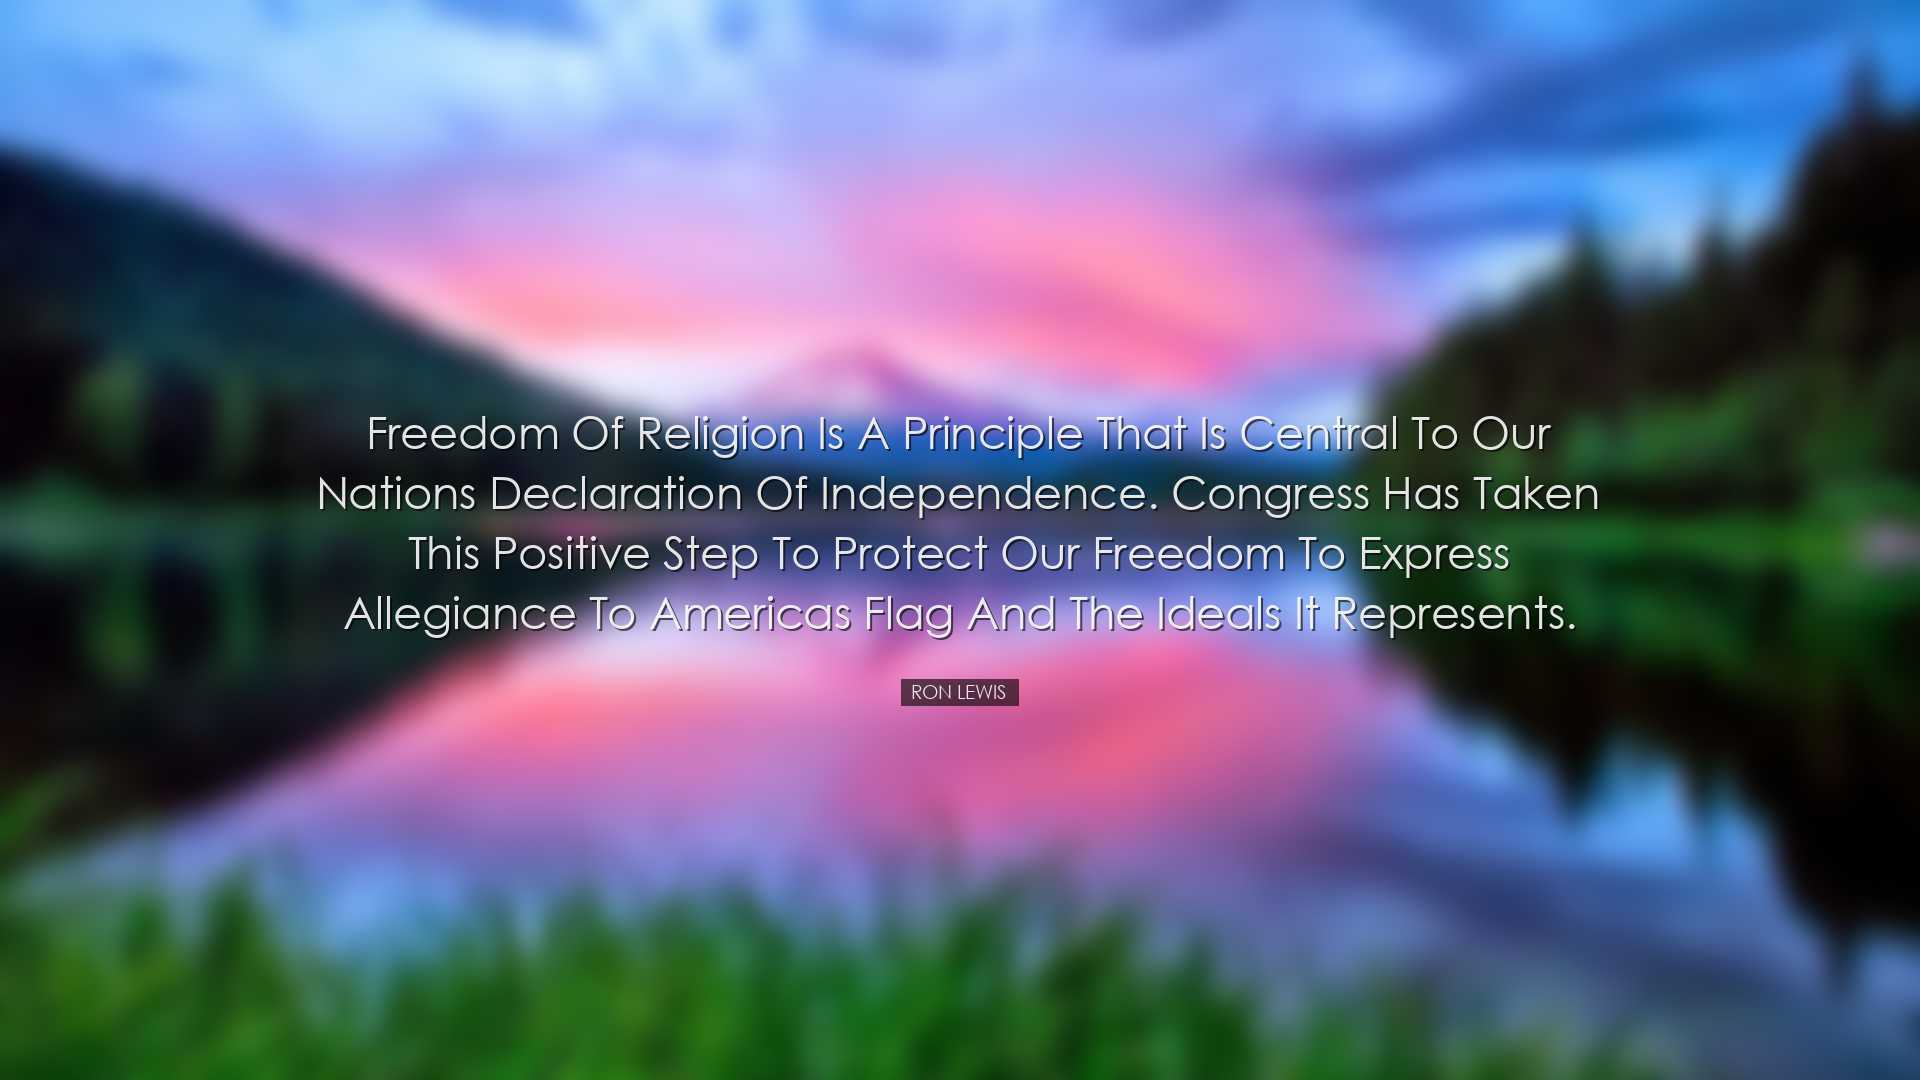 Freedom of religion is a principle that is central to our Nations